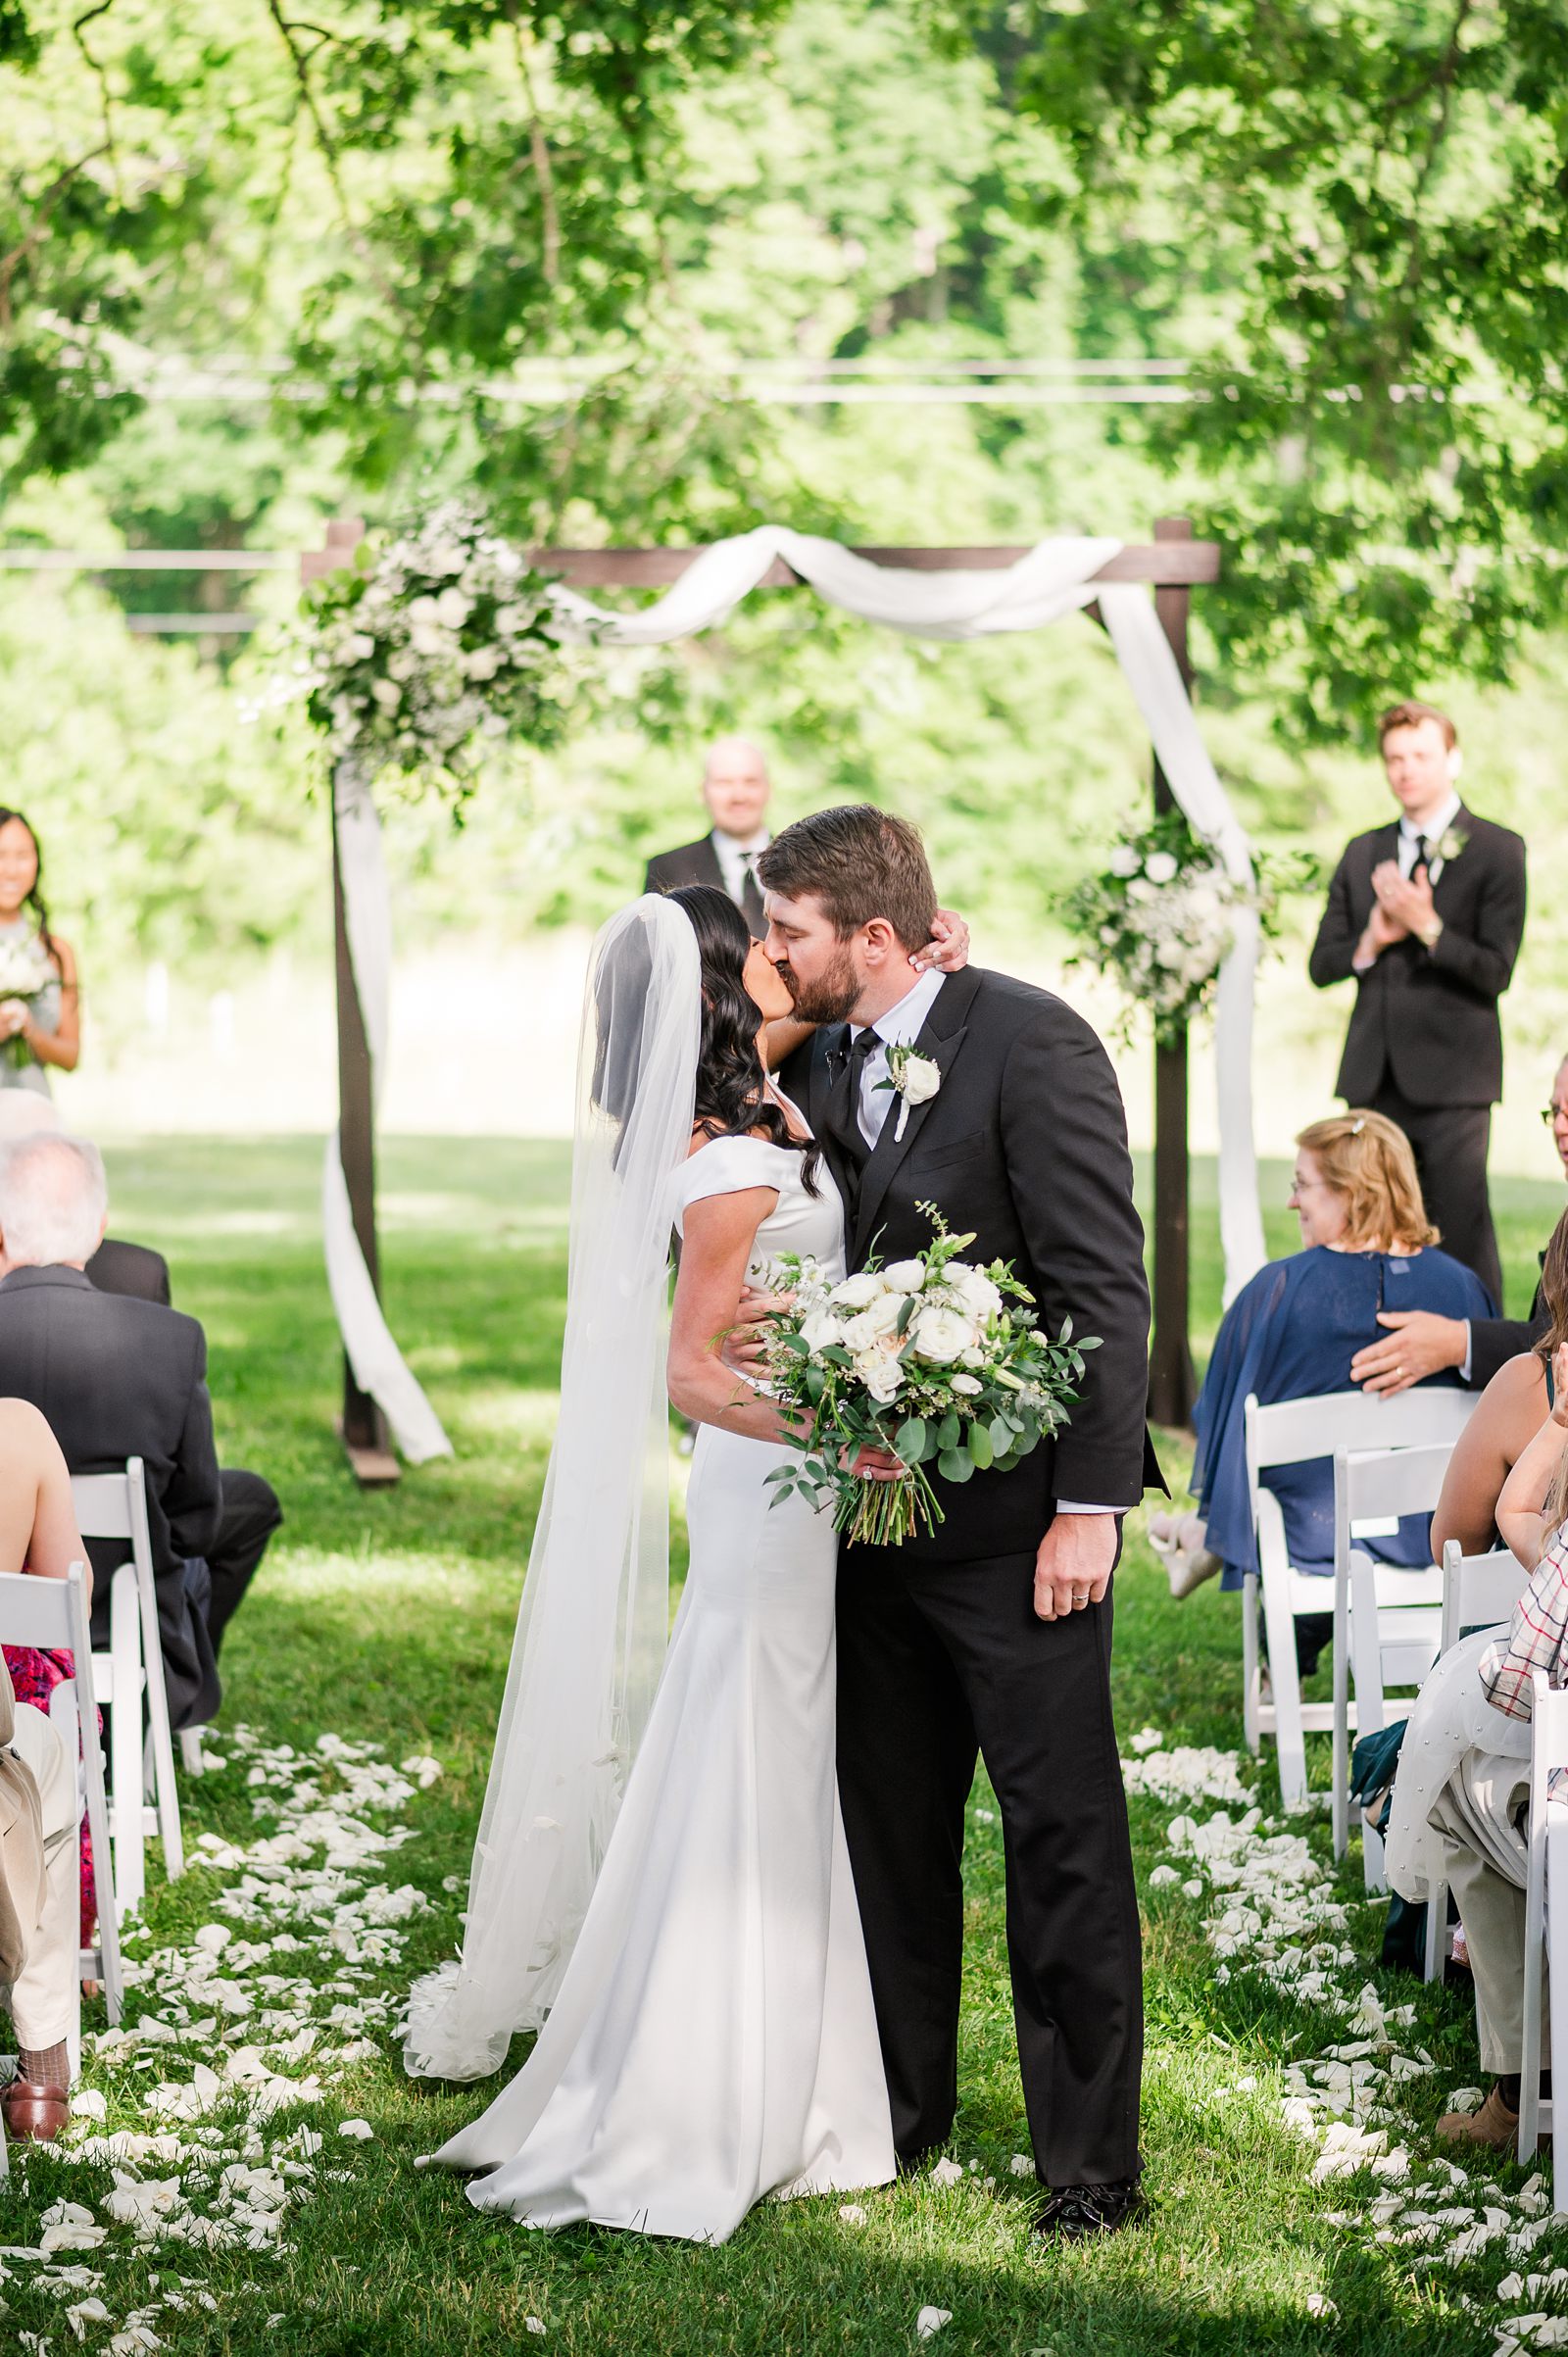 Exit Kiss during Spring Virginia Wedding ceremony in backyard 